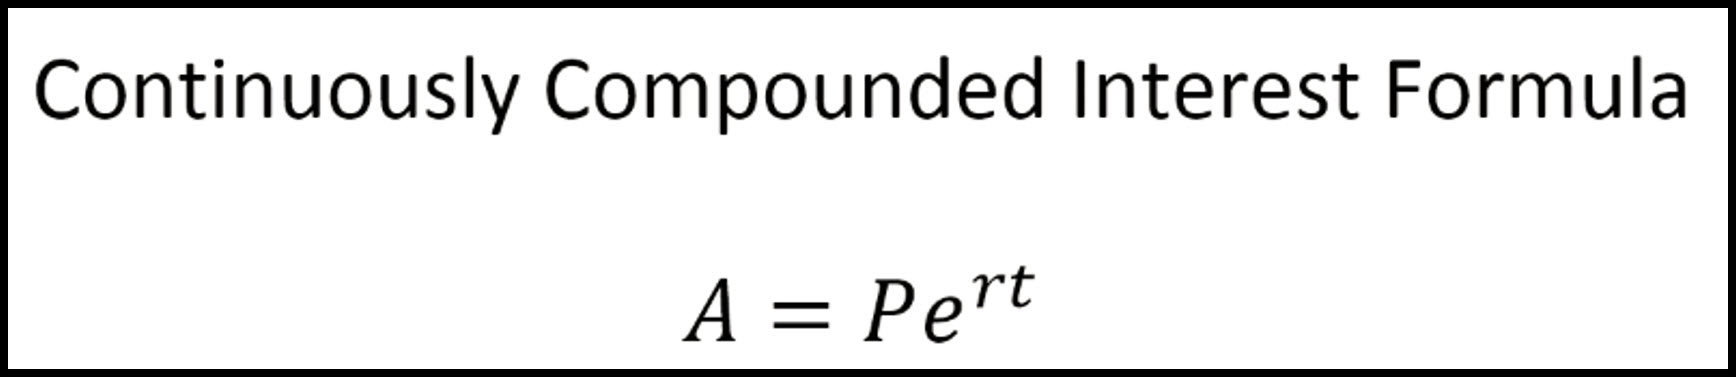 Notes for Continously Compounded Interest Formula